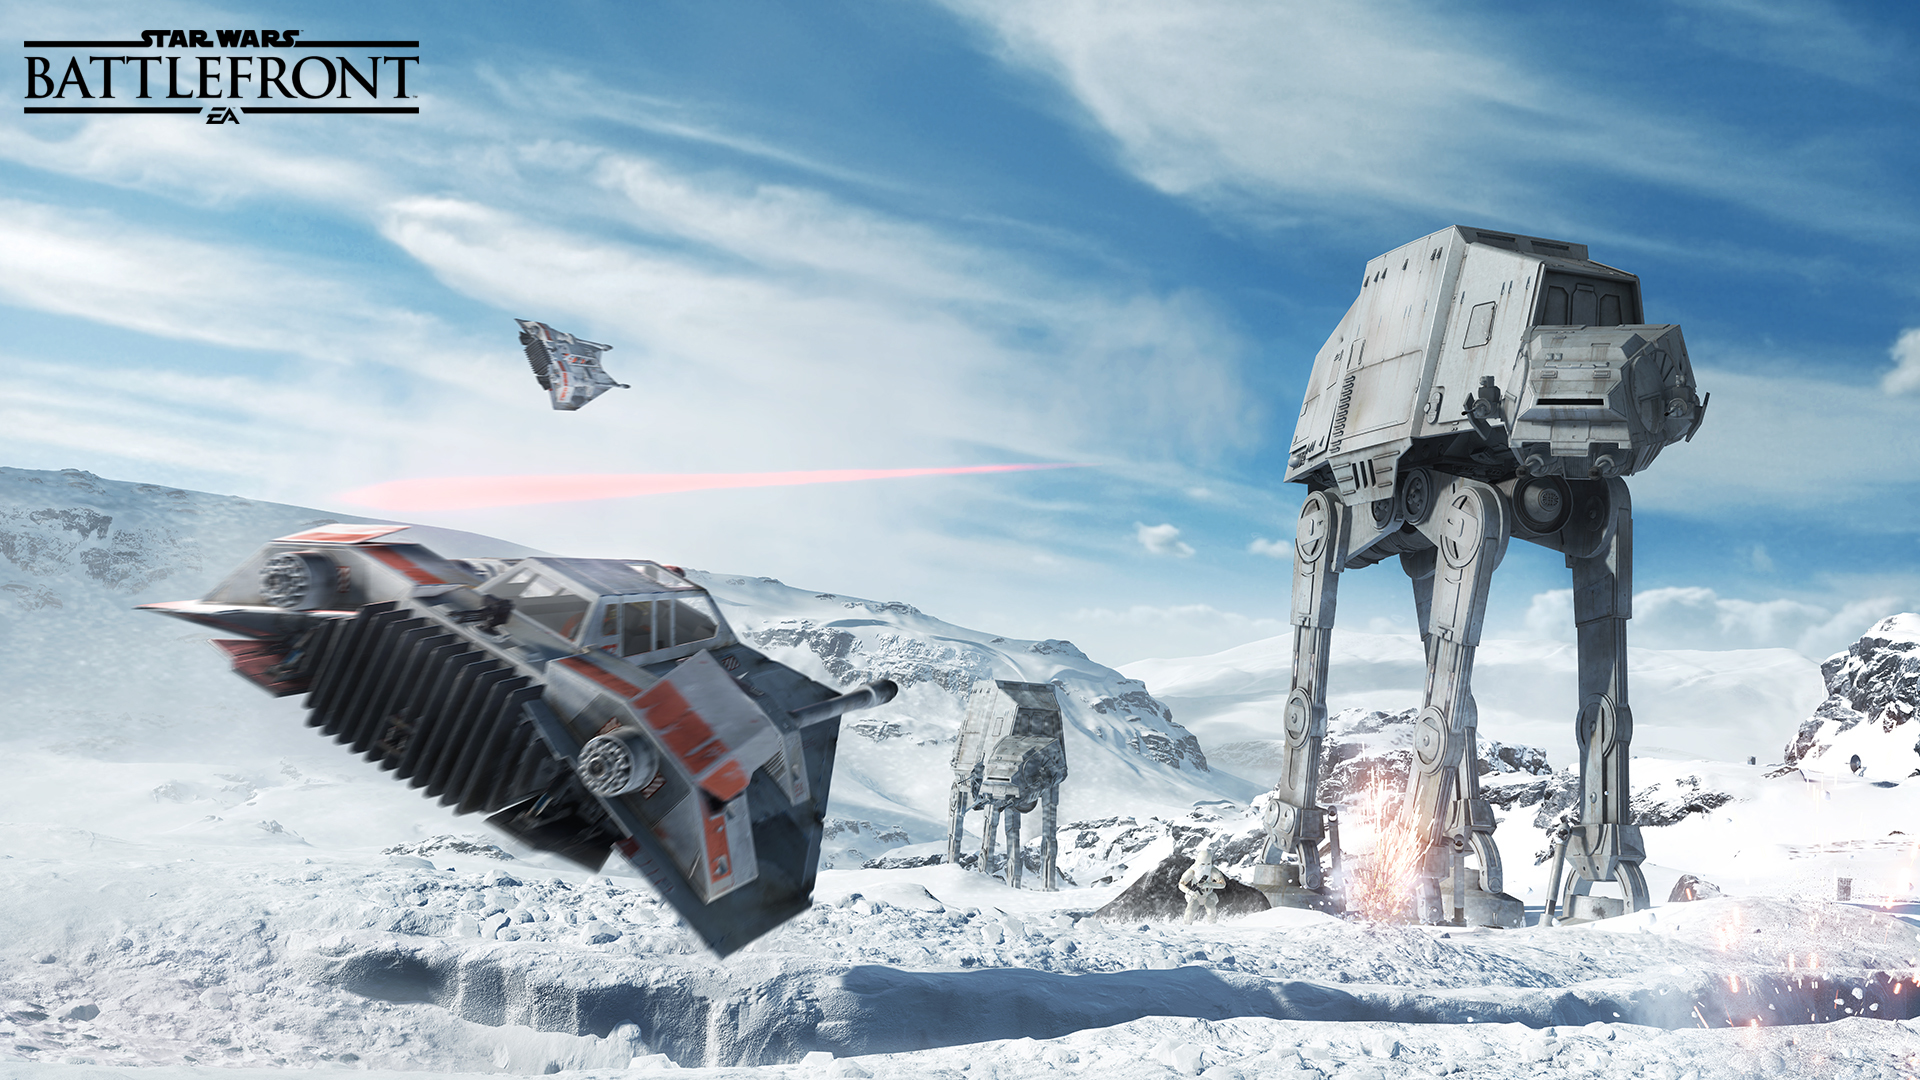 Star Wars Battlefront Electronic Arts Dice The Force Awakens